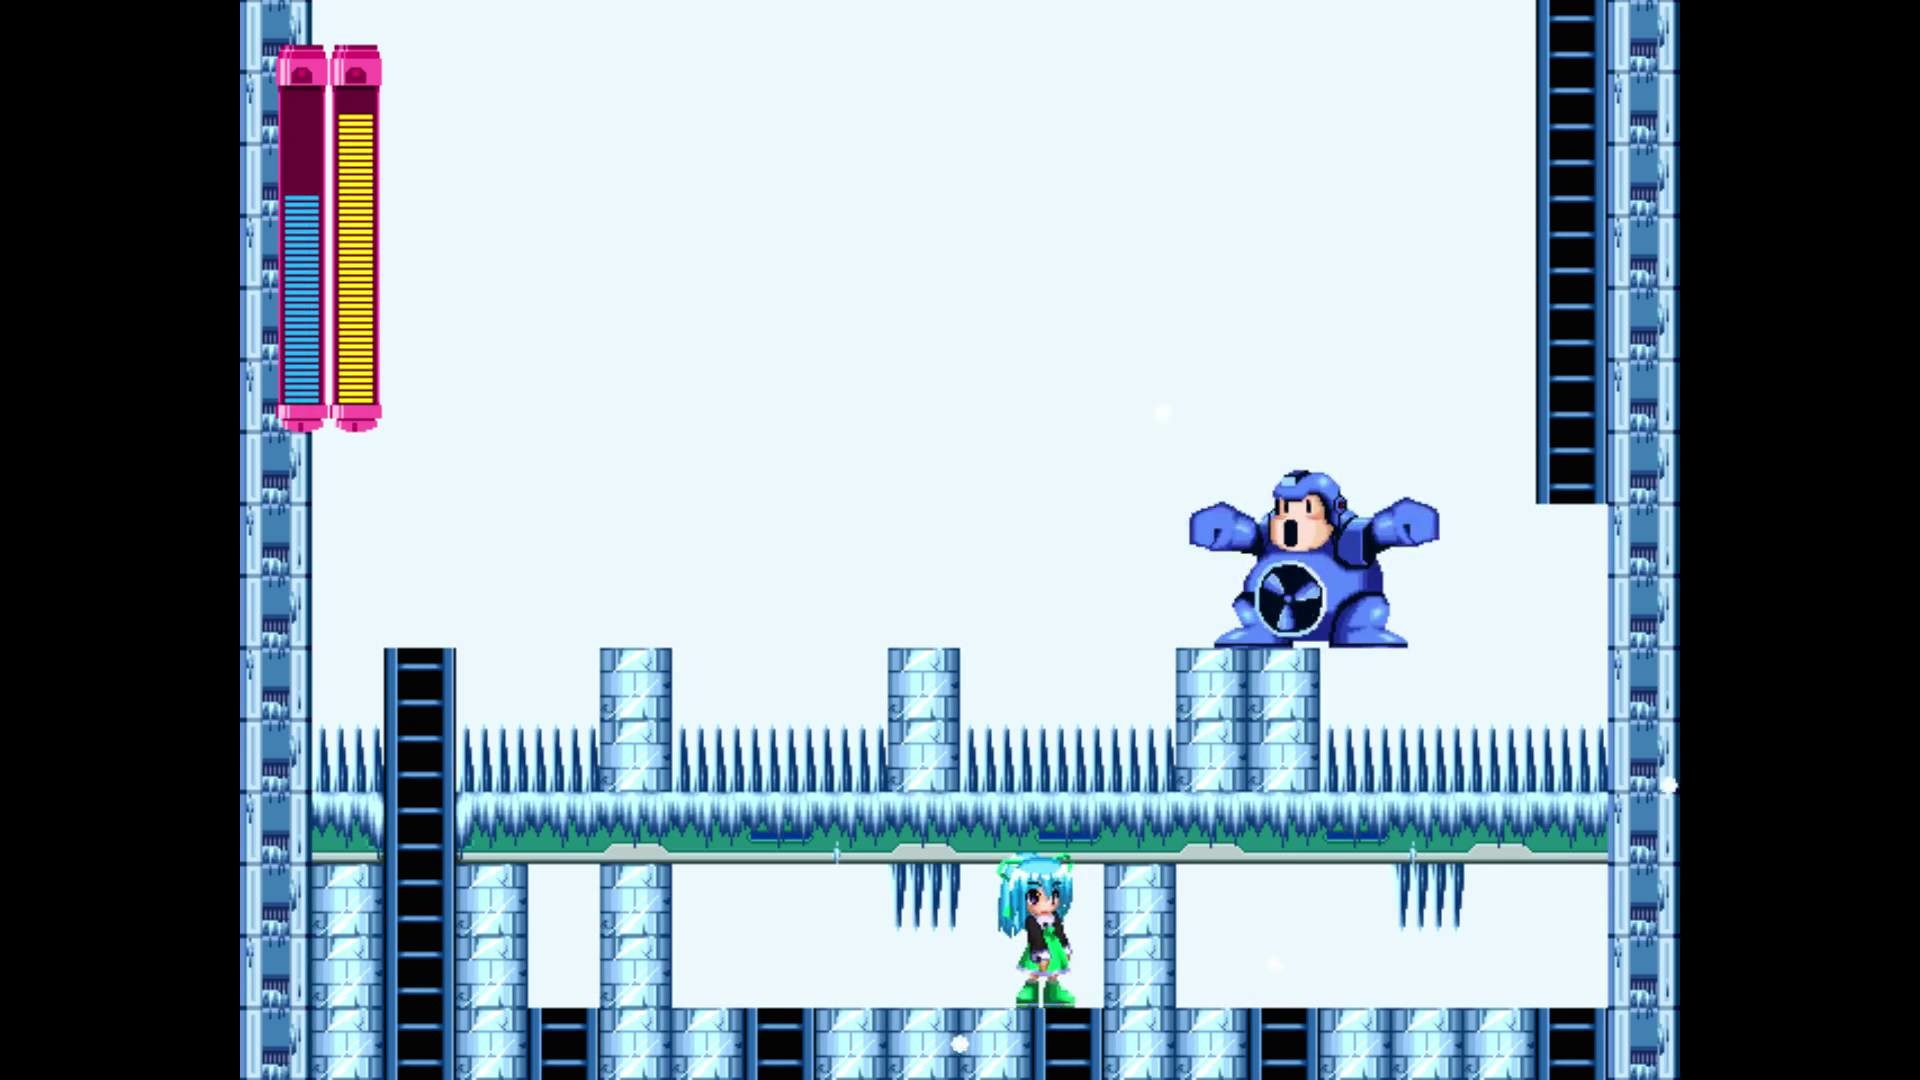 1920x1080 Rockman R - Dr Wily's Counterattack #14: Minimalist Backgrounds